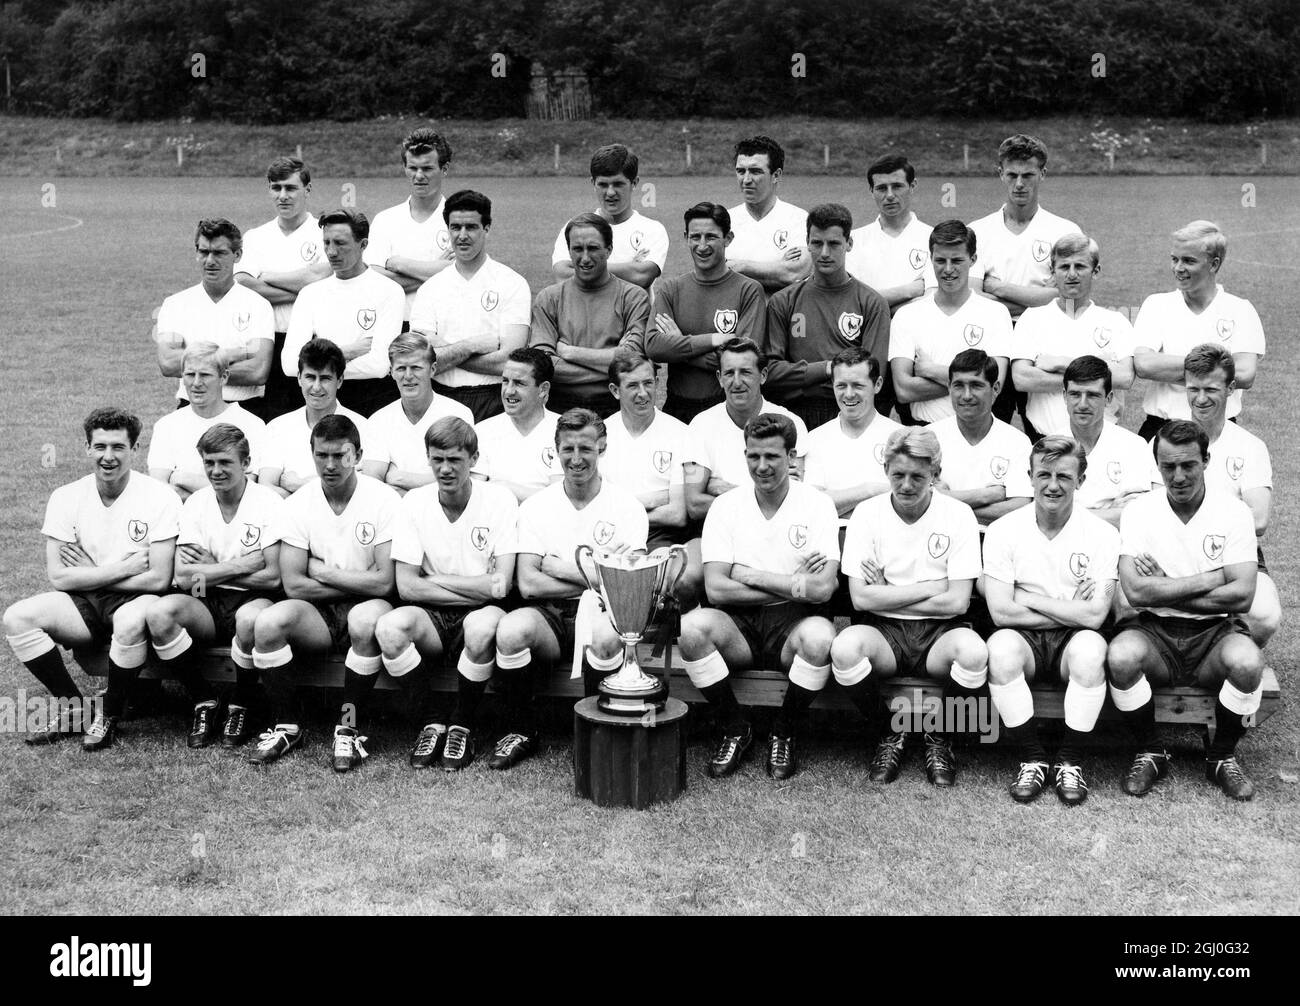 Tottenham Hotspur Team Back Row Left to Right - J Lye, A Smith, J Sainty, R Smith, I Fusedale, B Embery. 2nd Row Left to Right - R Henry, M Hopkins, M Norman, J Hollowbread, W Brown, R Brown, A Dennis, Reg Smith, and P Beal. 3rd Row Left to Right - F Saul, K Barton, P Baker, D Mackay, D Blanchflower, T Marchi, L Allen, J Smith, E Clayton, and J White. Front Row Left to Right - D Walker, D Possee, R Low, D Gillingwater, C Jones, B Aitchison, R Piper, T Dyson and J Greaves. August 1963 Stock Photo